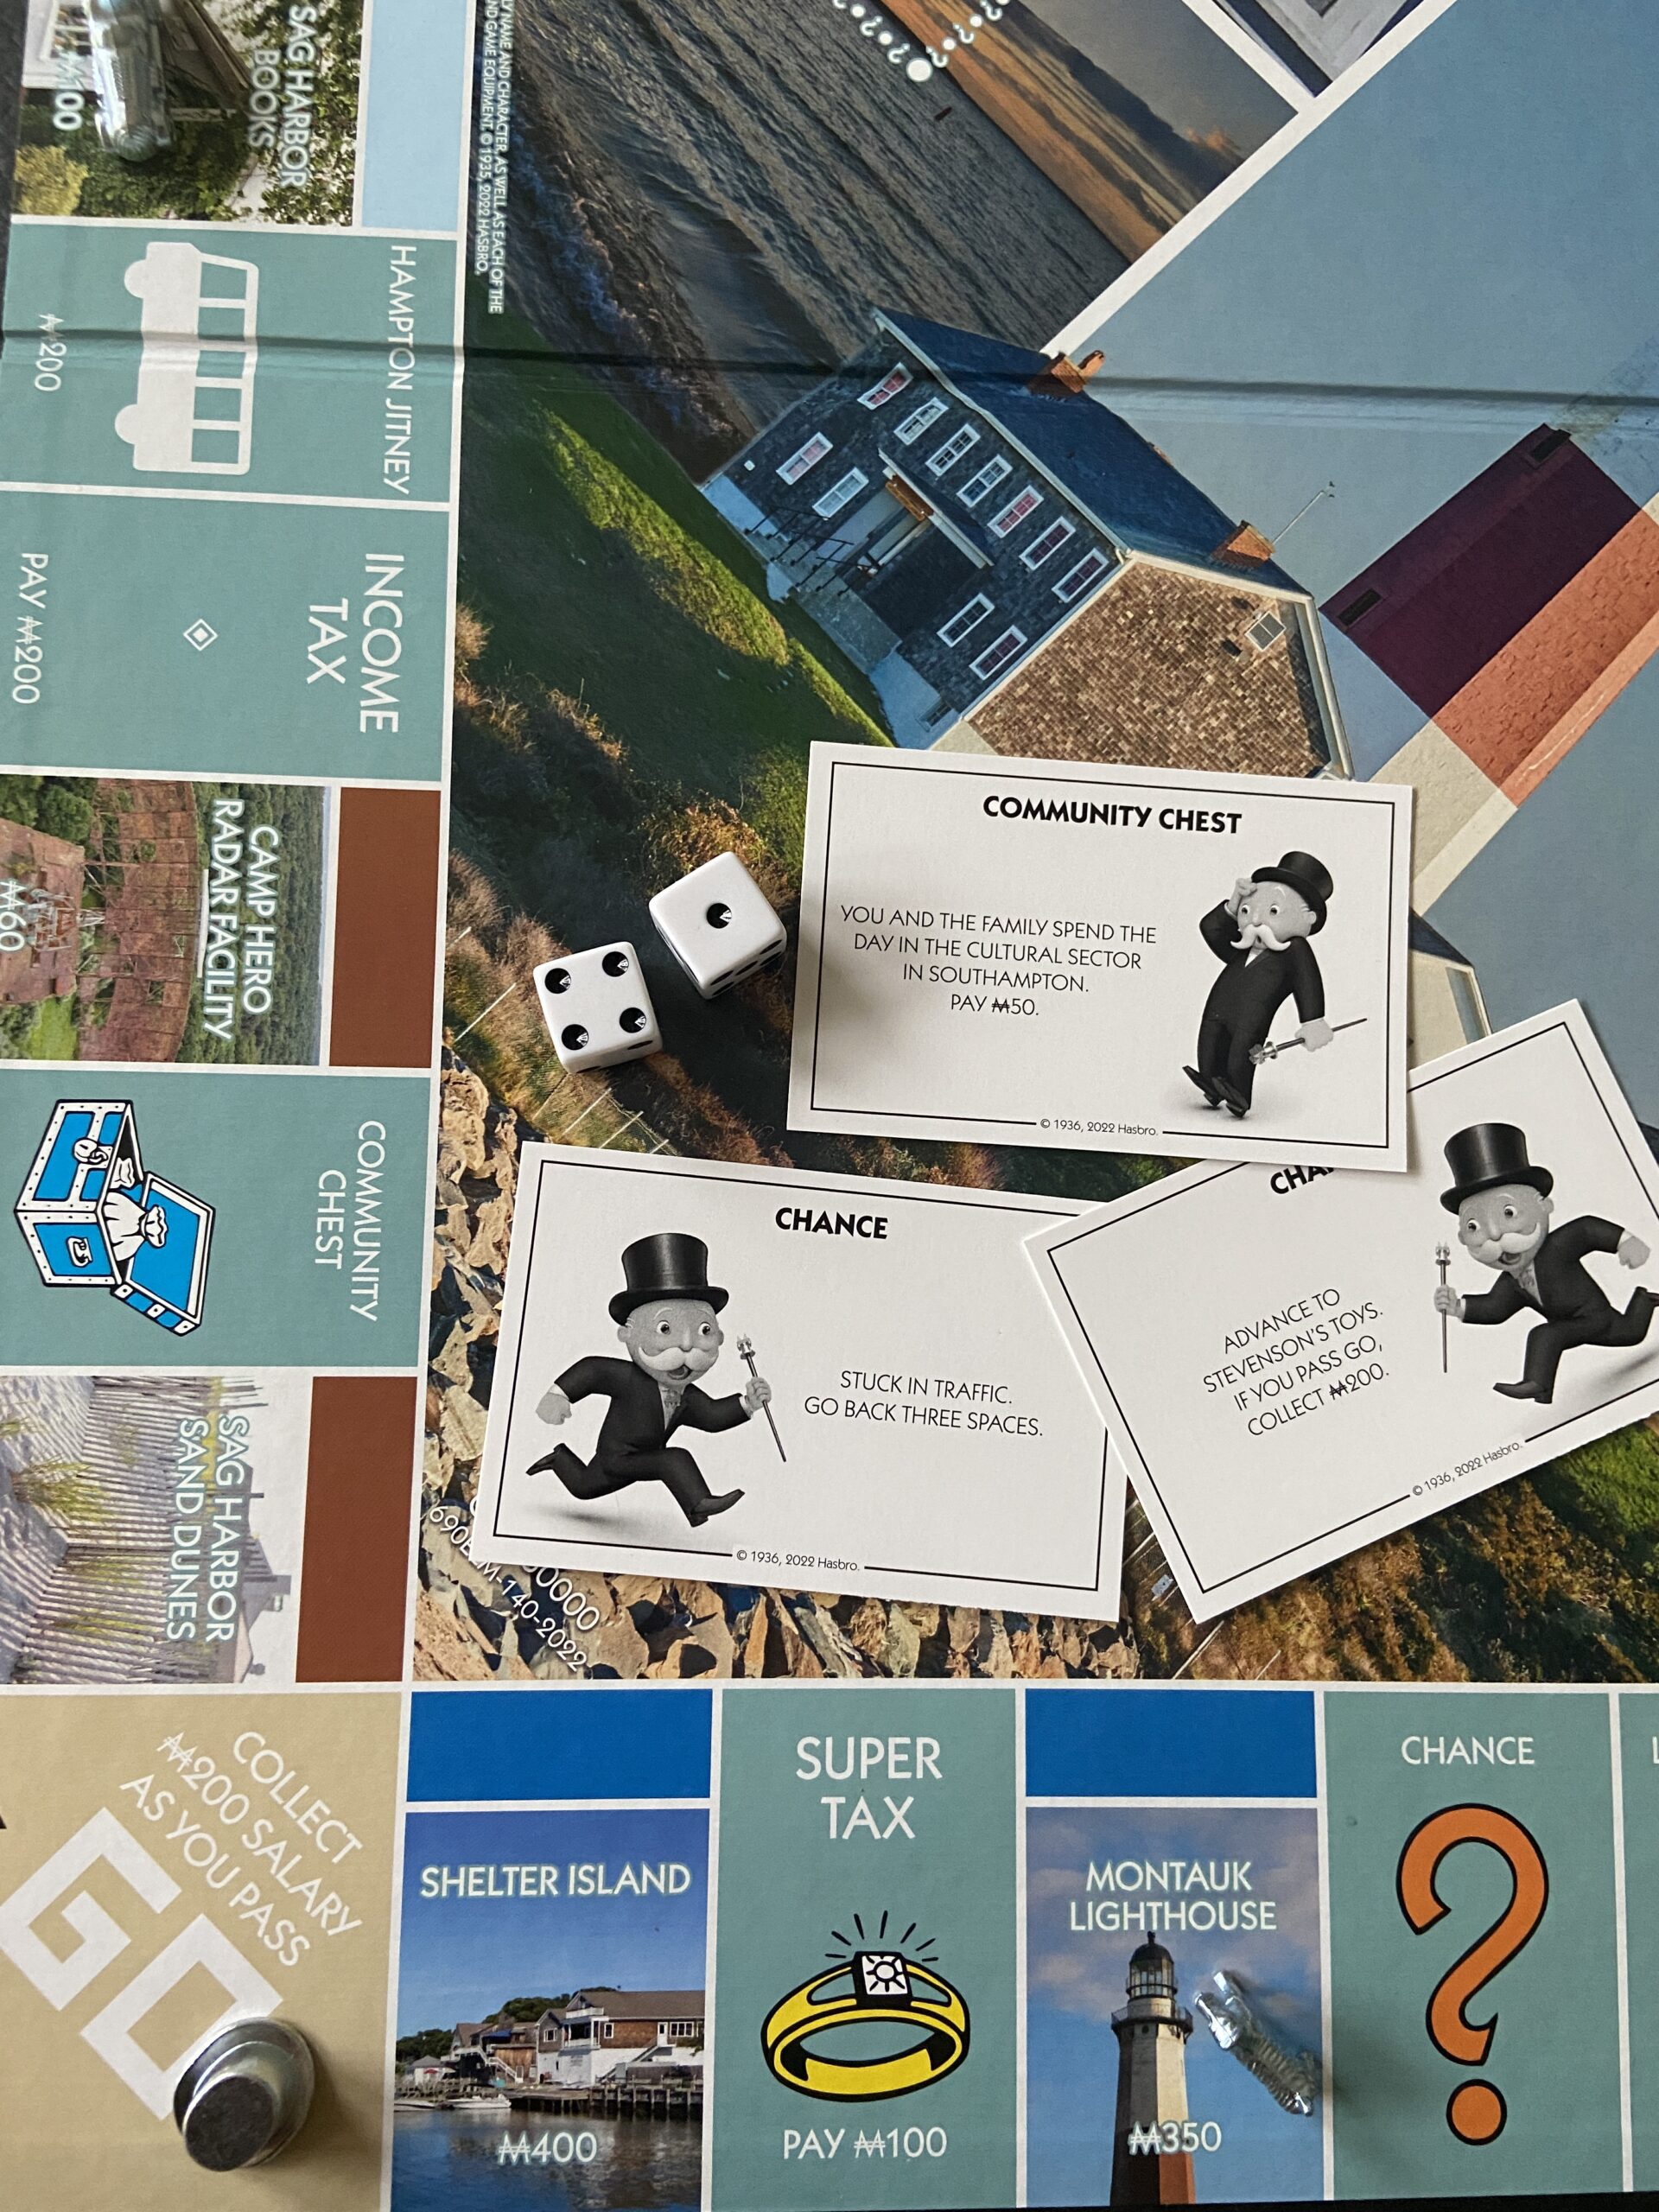 BY JULIA HEMING Monopoly Hamptons edition features unique community chest and chance cards.